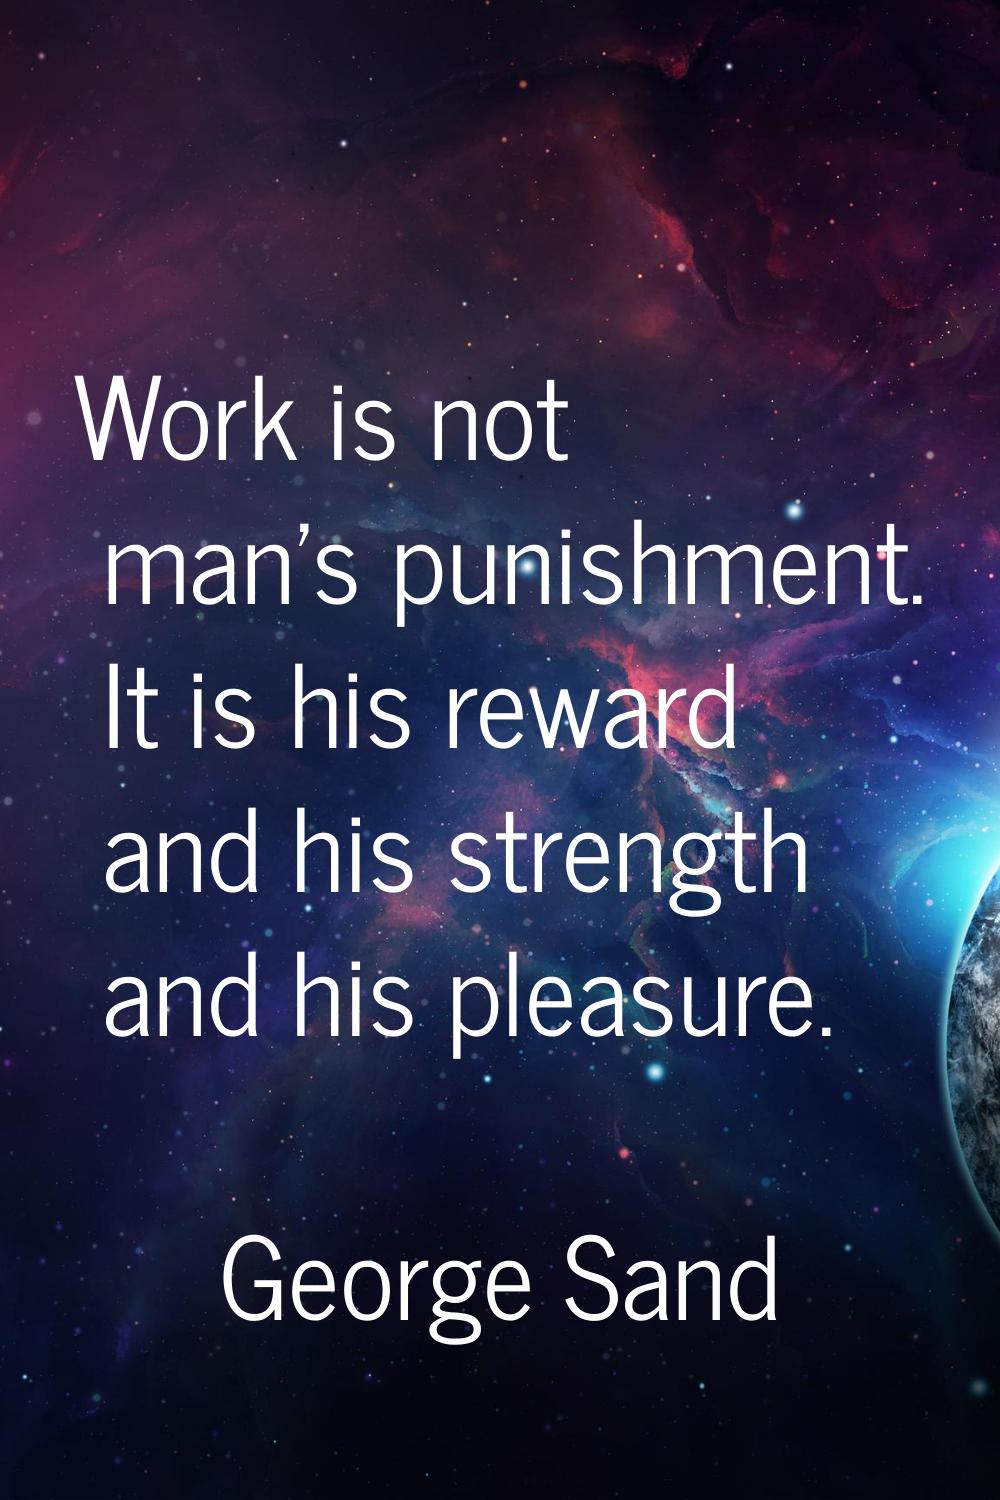 Work is not man's punishment. It is his reward and his strength and his pleasure.